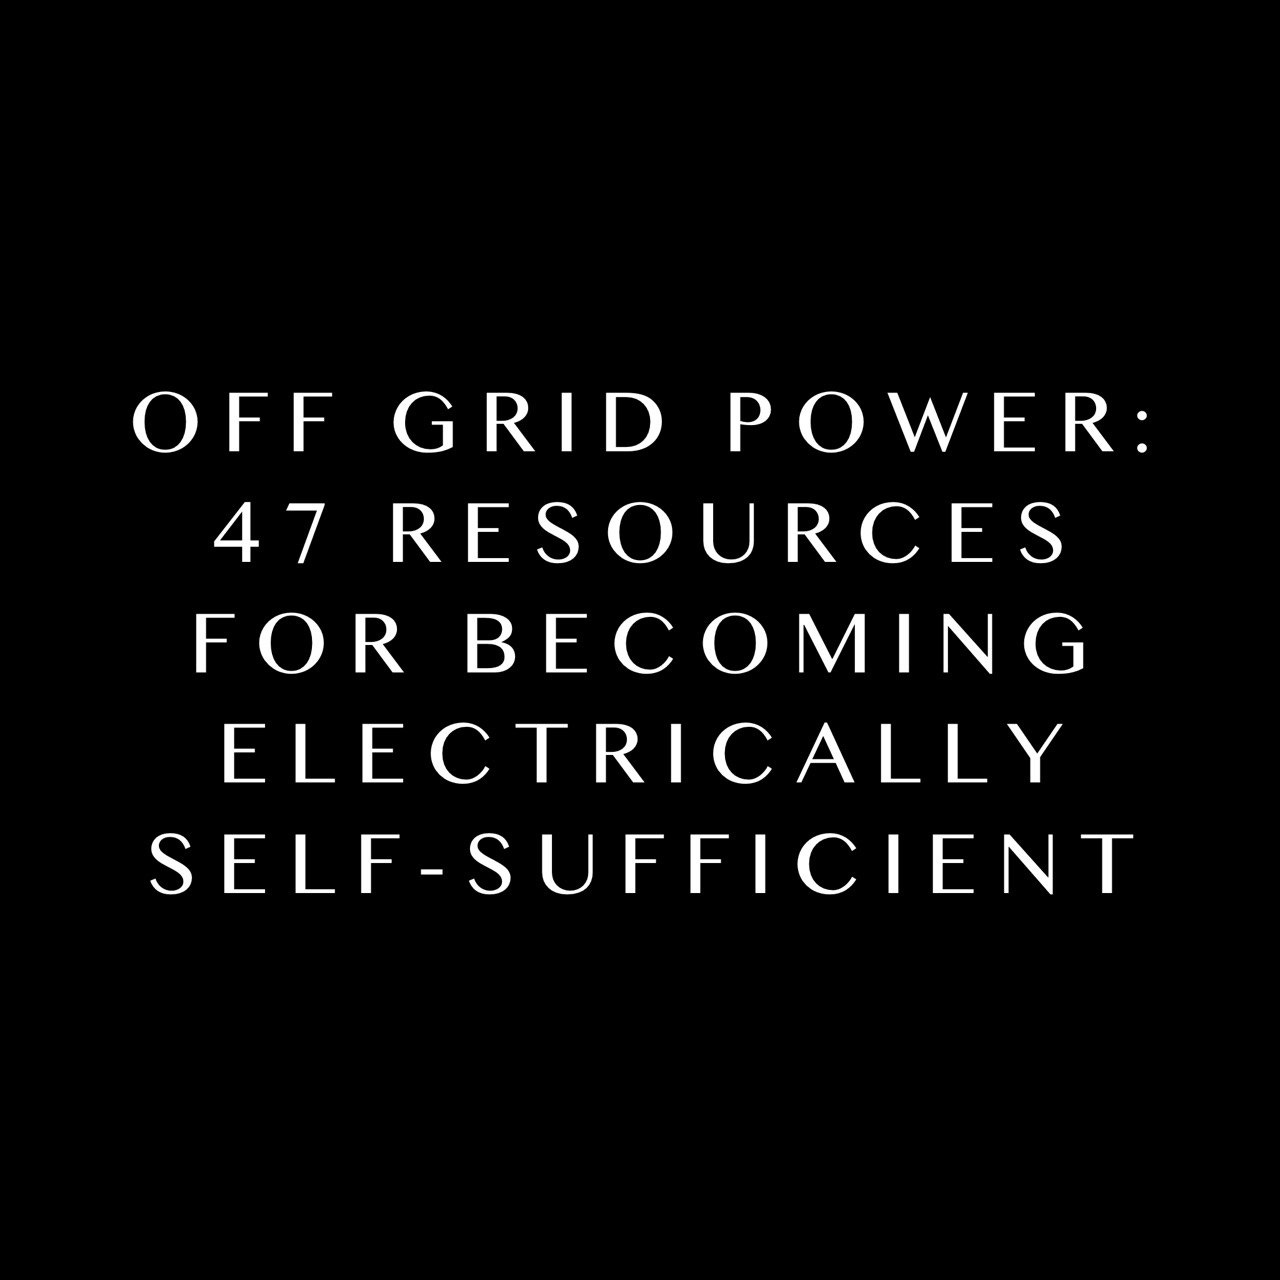 Off Grid Power: 47 Resources for Becoming Electrically Self-Sufficient